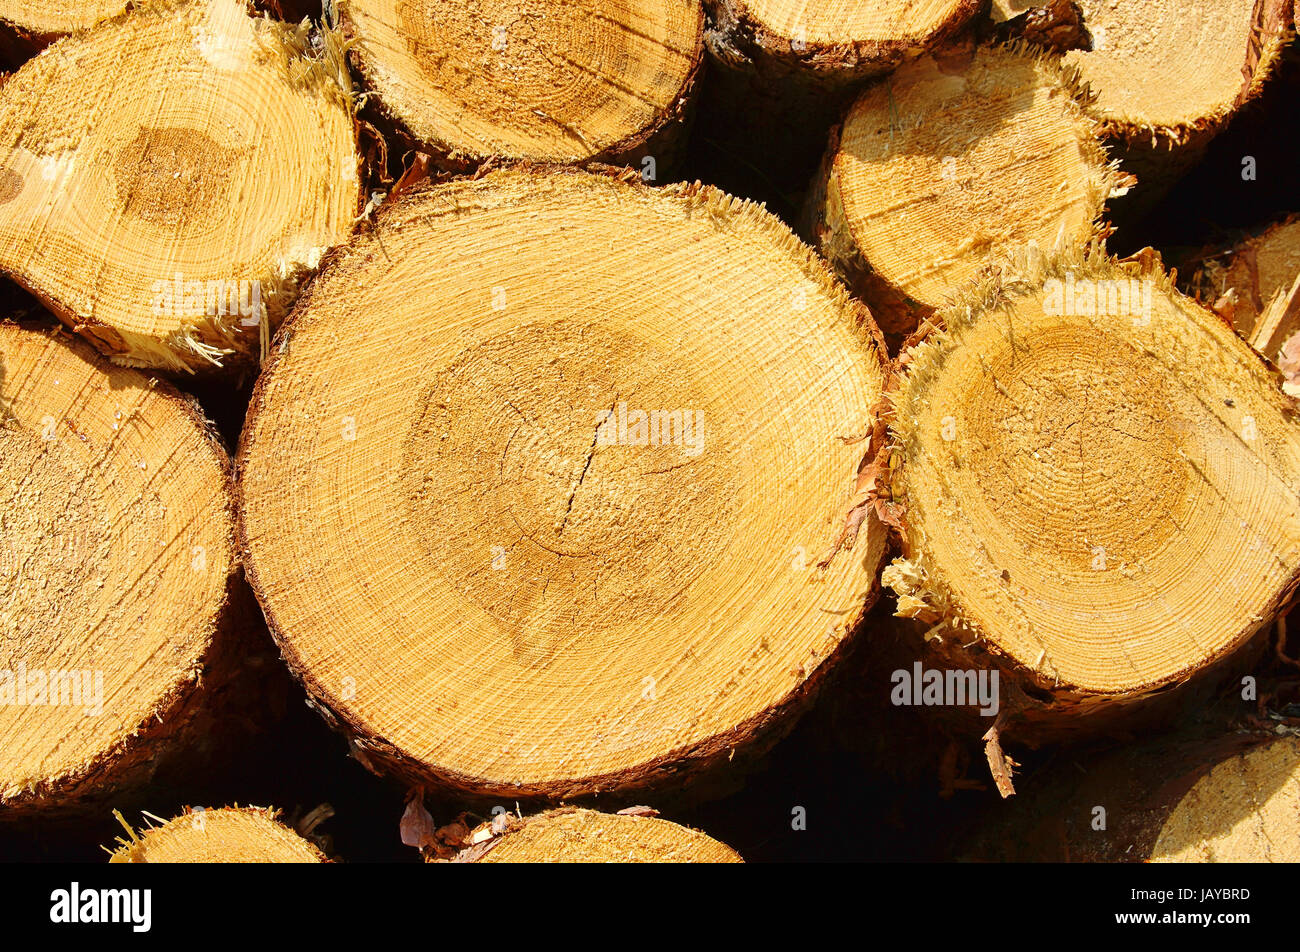 Holzstapel - stack of wood 36 Stock Photo